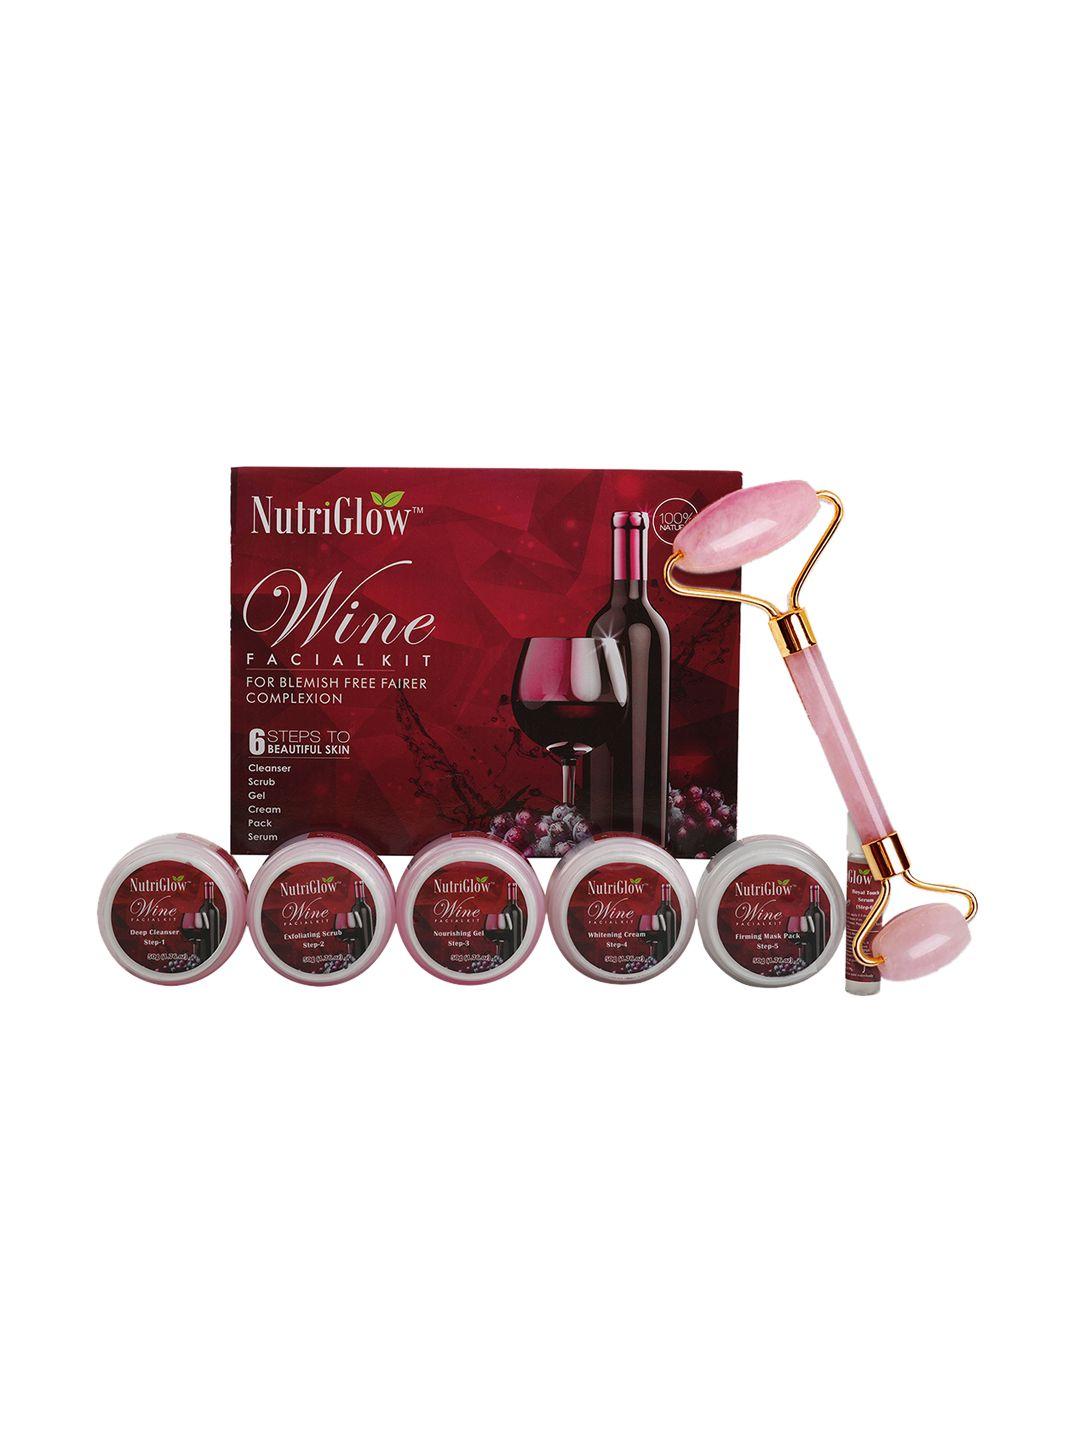 nutriglow sustainable wine facial kit for blemish free complexion with jade roller